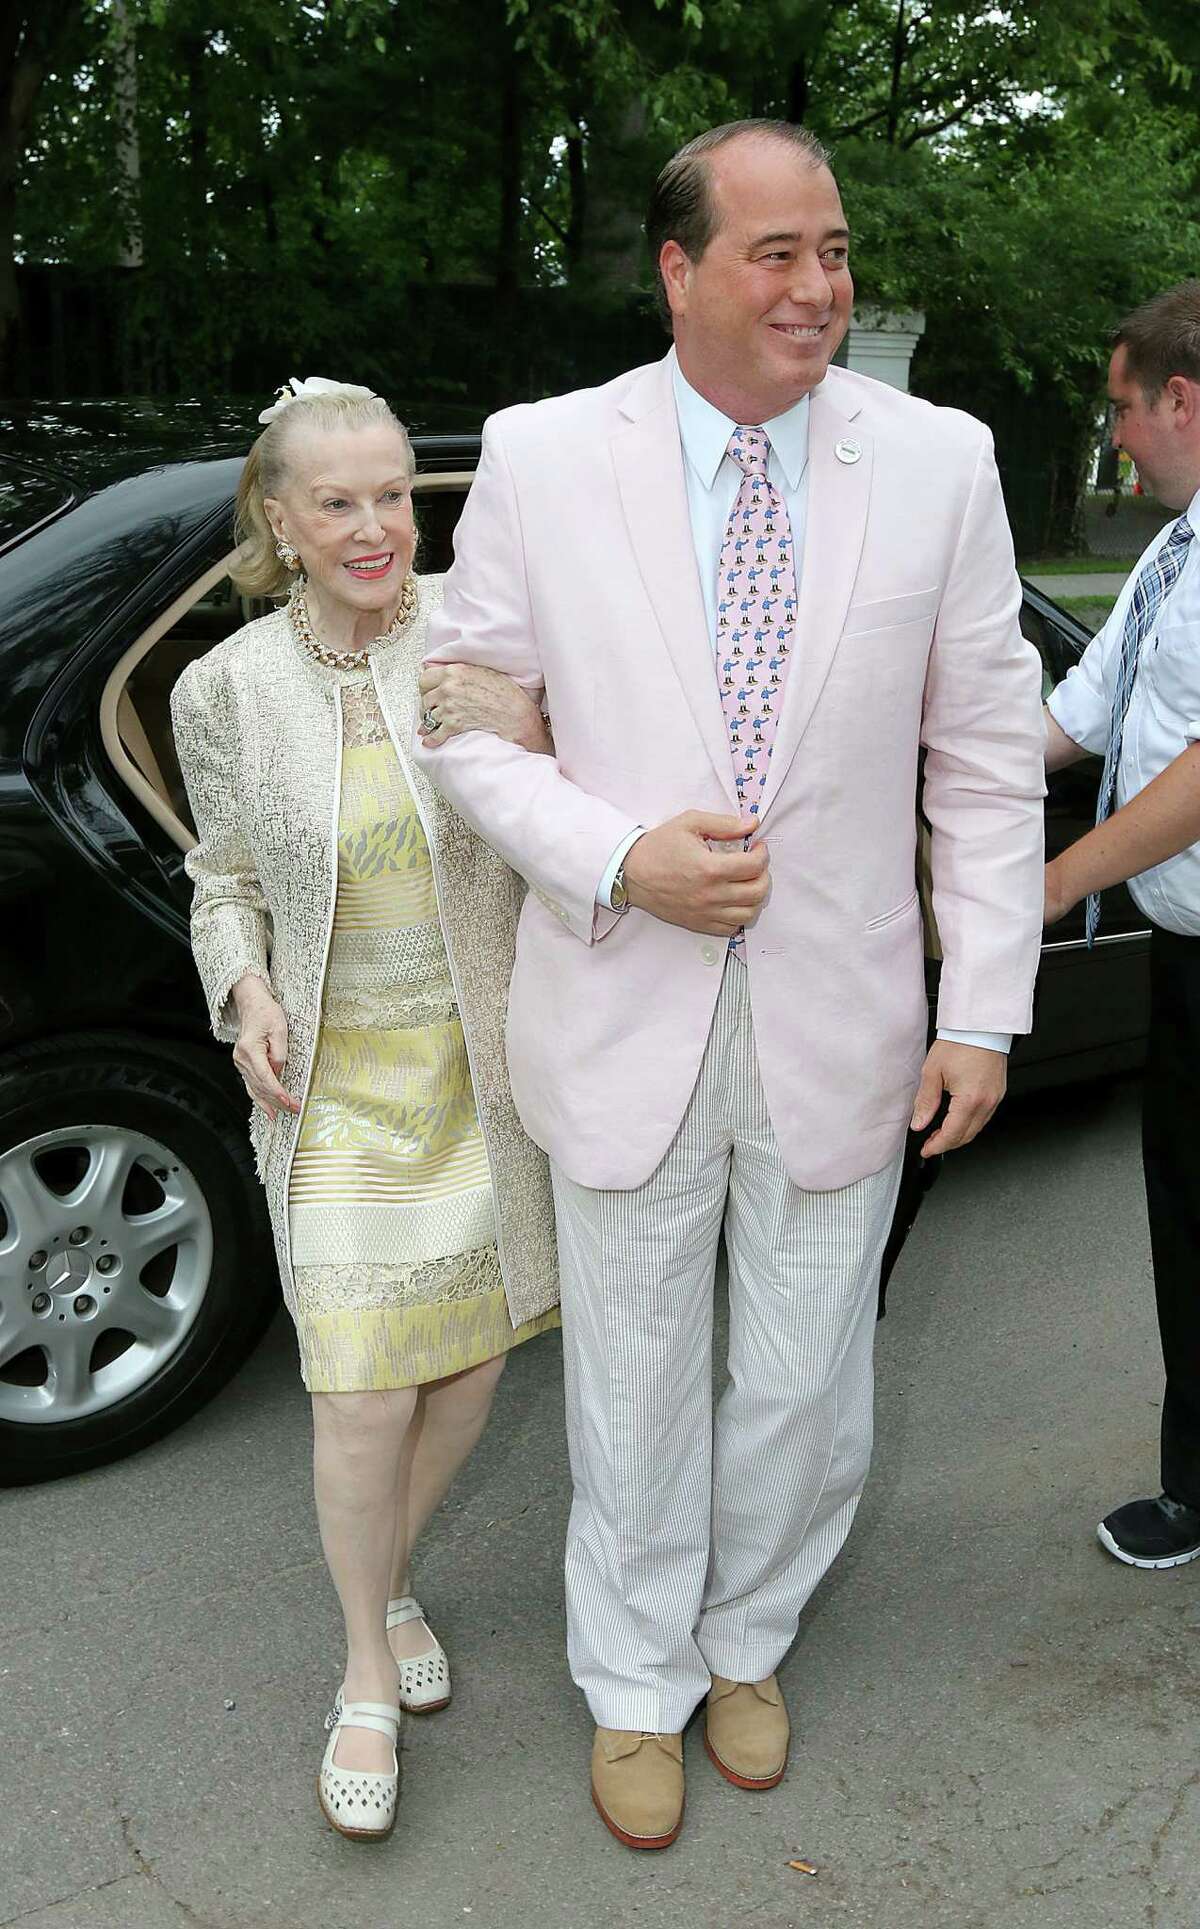 Saratoga Springs, NY - July 17, 2014 - (Photo by Joe Putrock/Special to the Times Union) - Philanthropist and prominent socialite Marylou Whitney(left) and her husband John Hendrickson(right) arrive at the 21st Annual Newton Plaza Siro's Cup to benefit the Center for Disability Services.